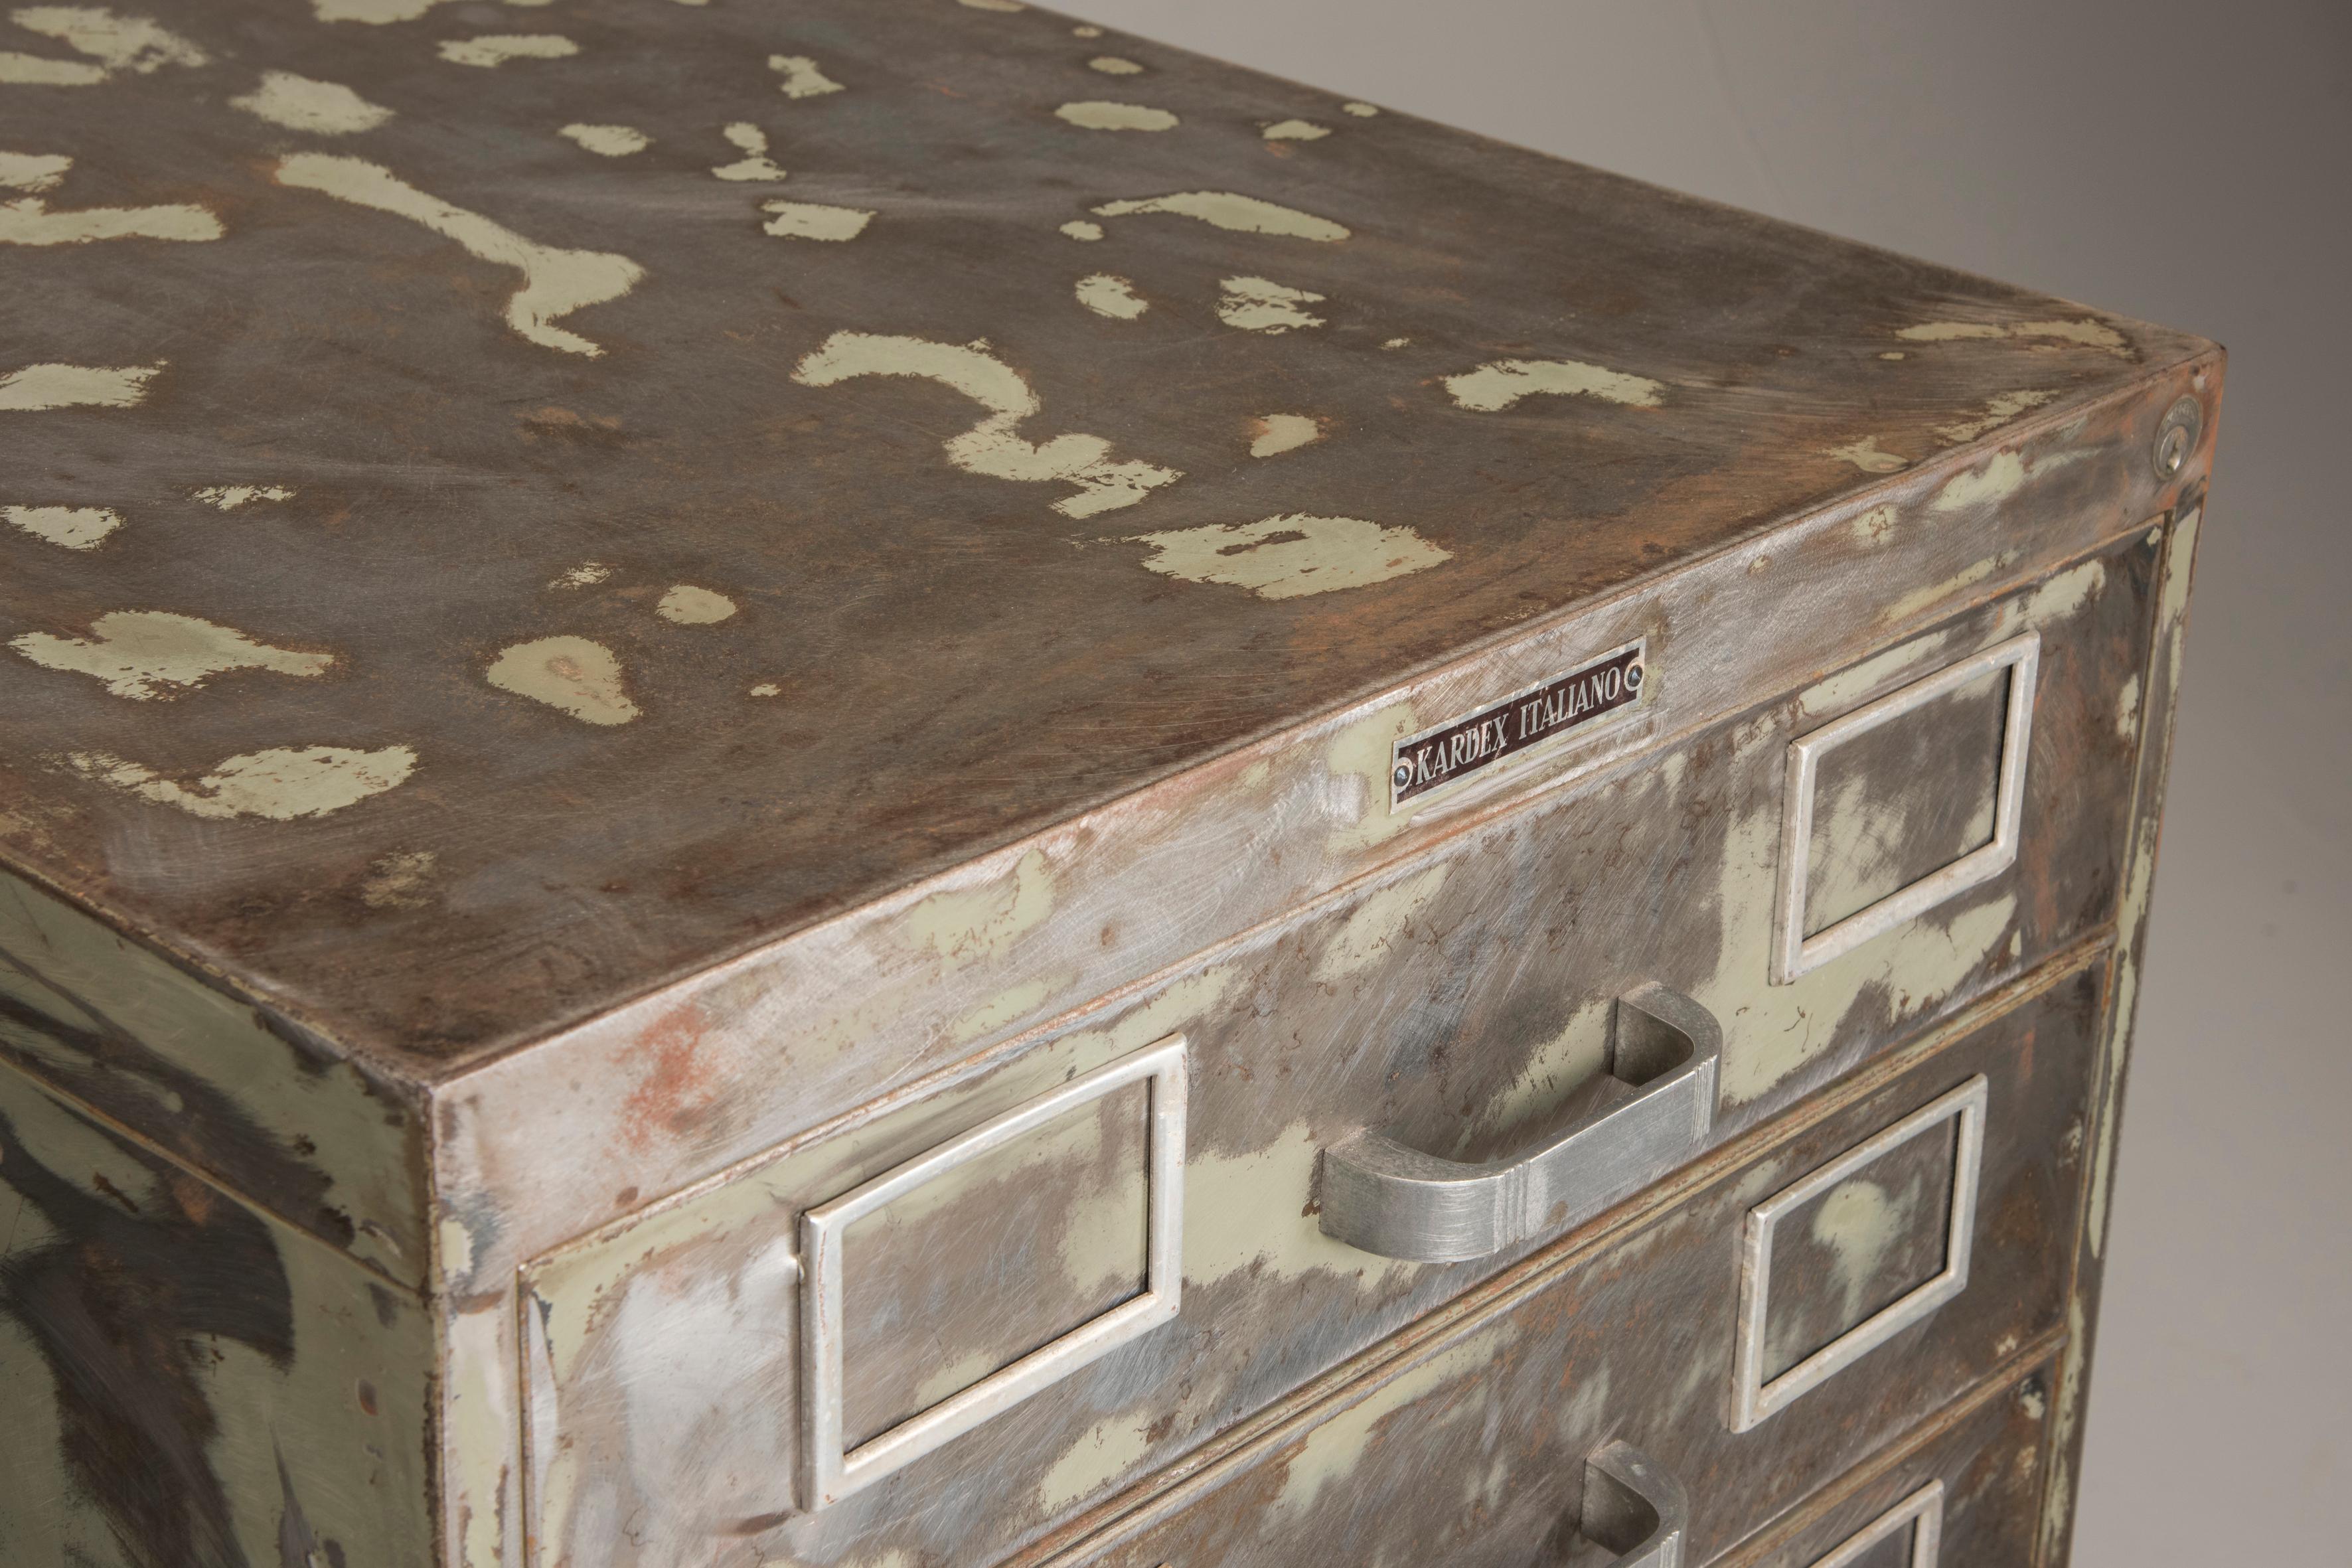 20th Century Industrial Brushed Steel Distressed Look Wheeled Filing 3 Cabinets with Drawers